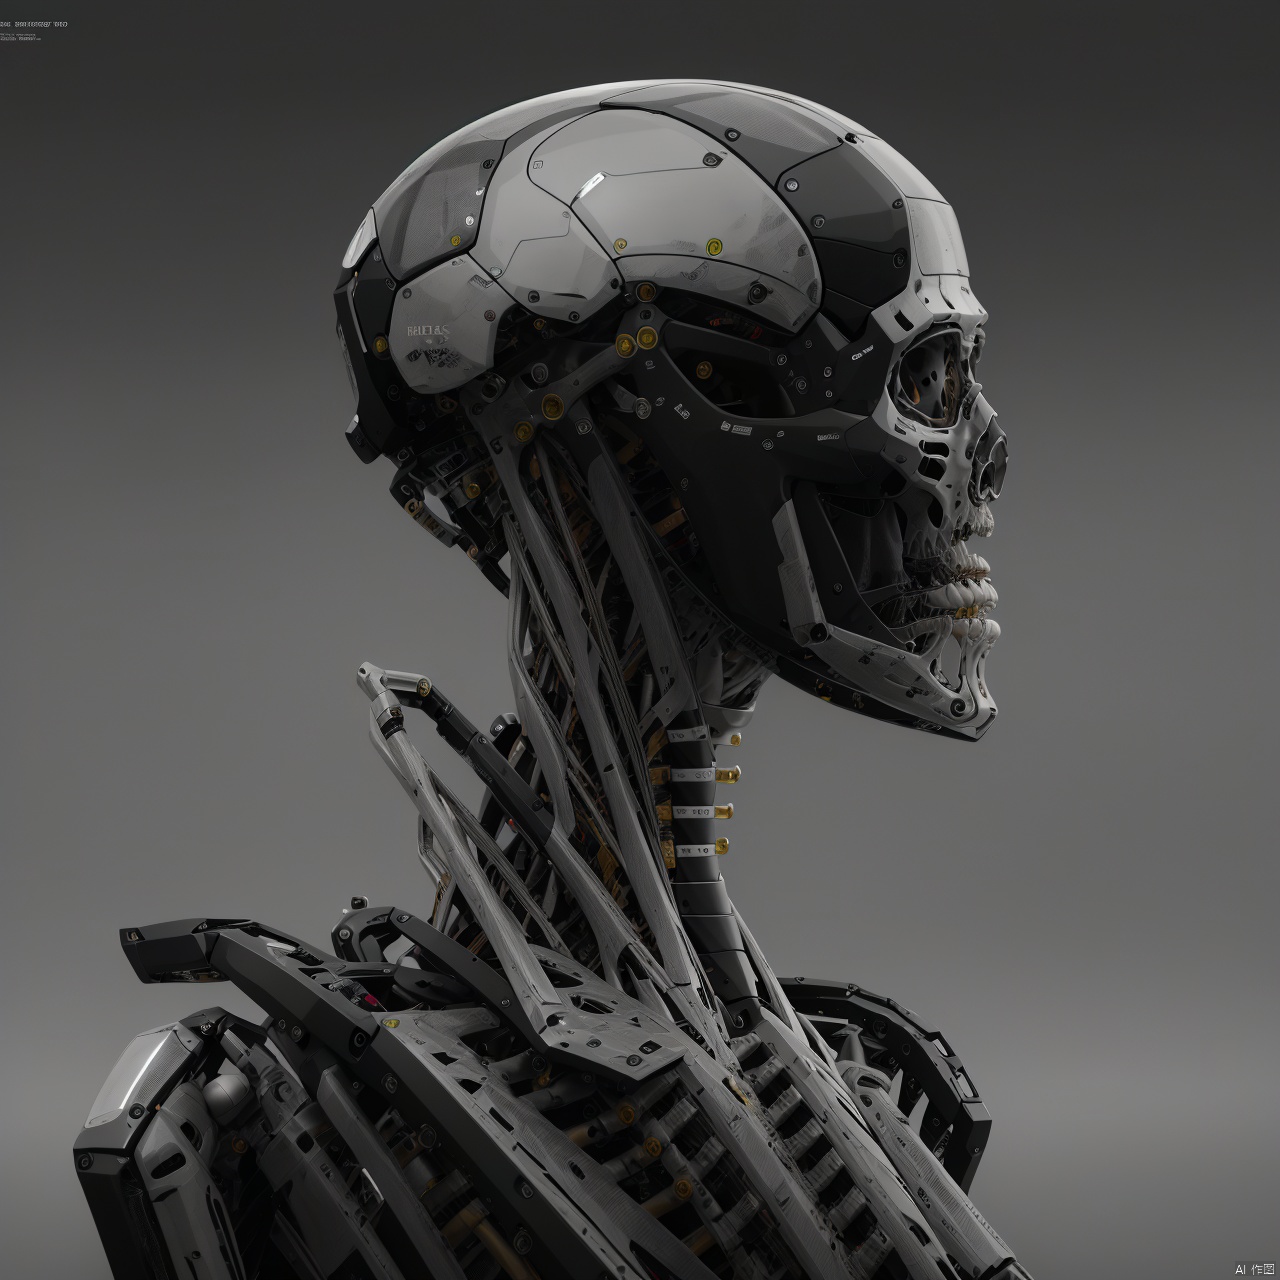  Front view of the robot,grey background, english text, no humans, watermark, robot, mecha, science fiction, realistic, skeleton, non-humanoid robot, spine, A cool mecha sketch design